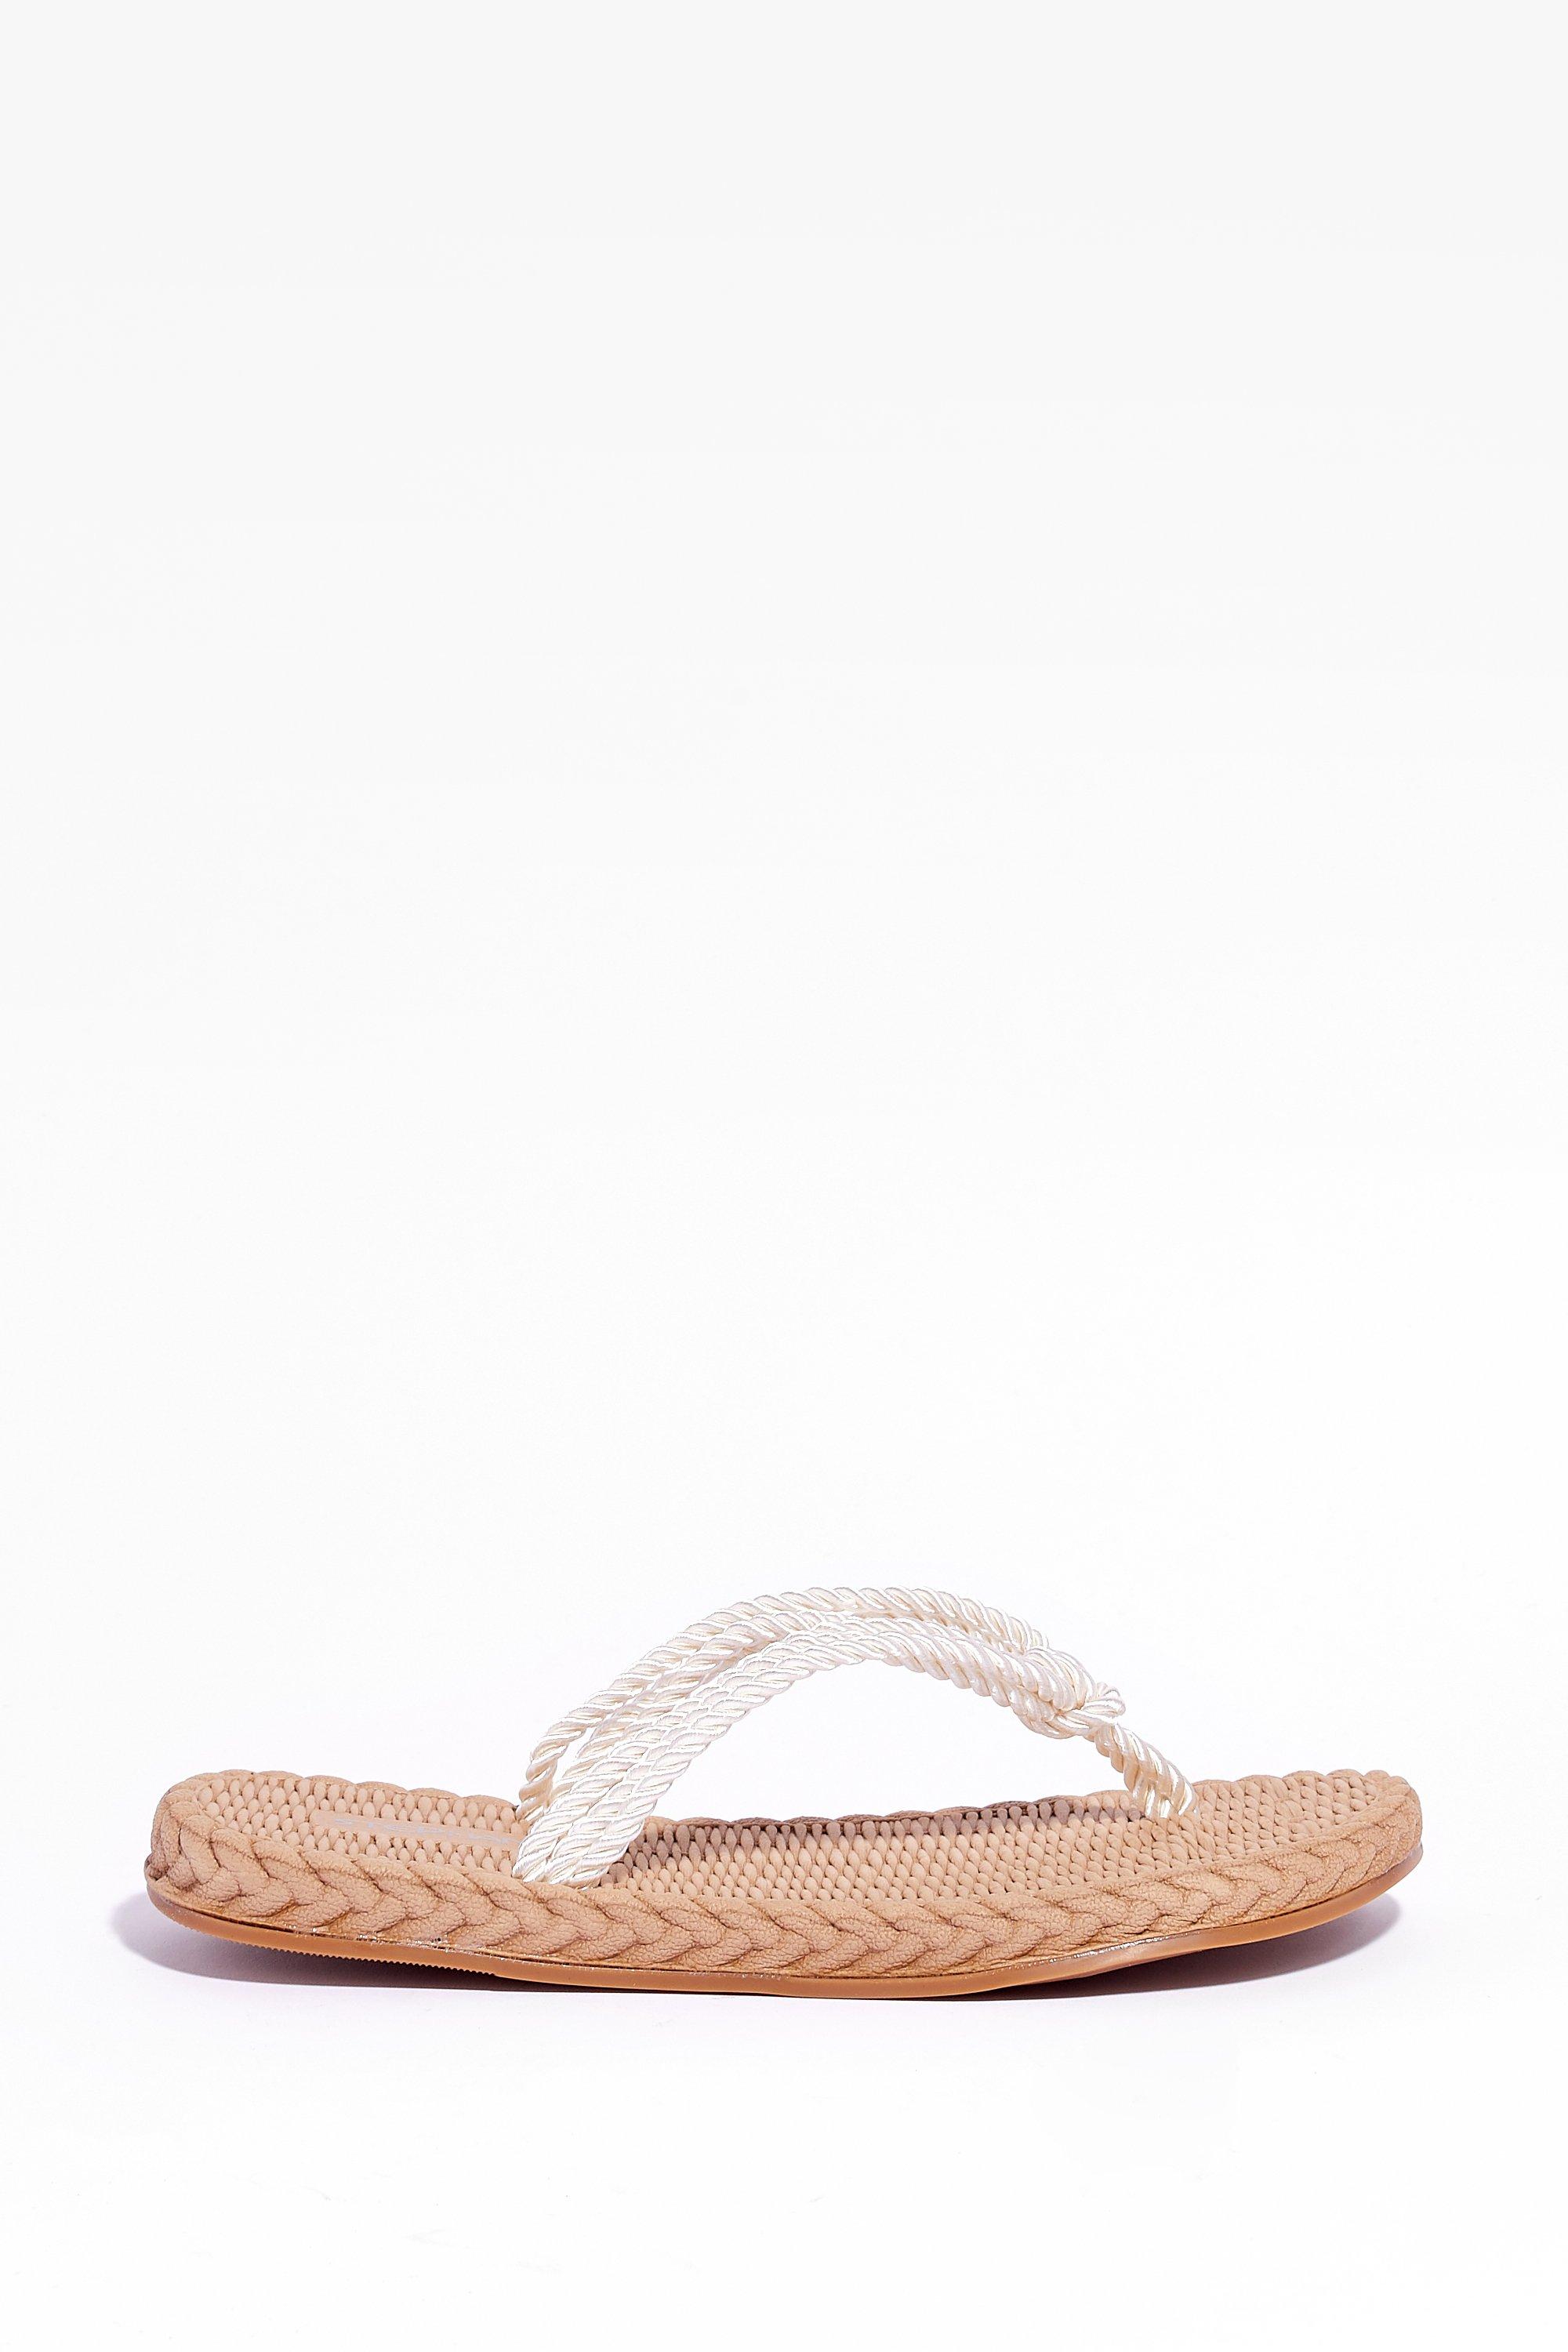 woven rope sandals